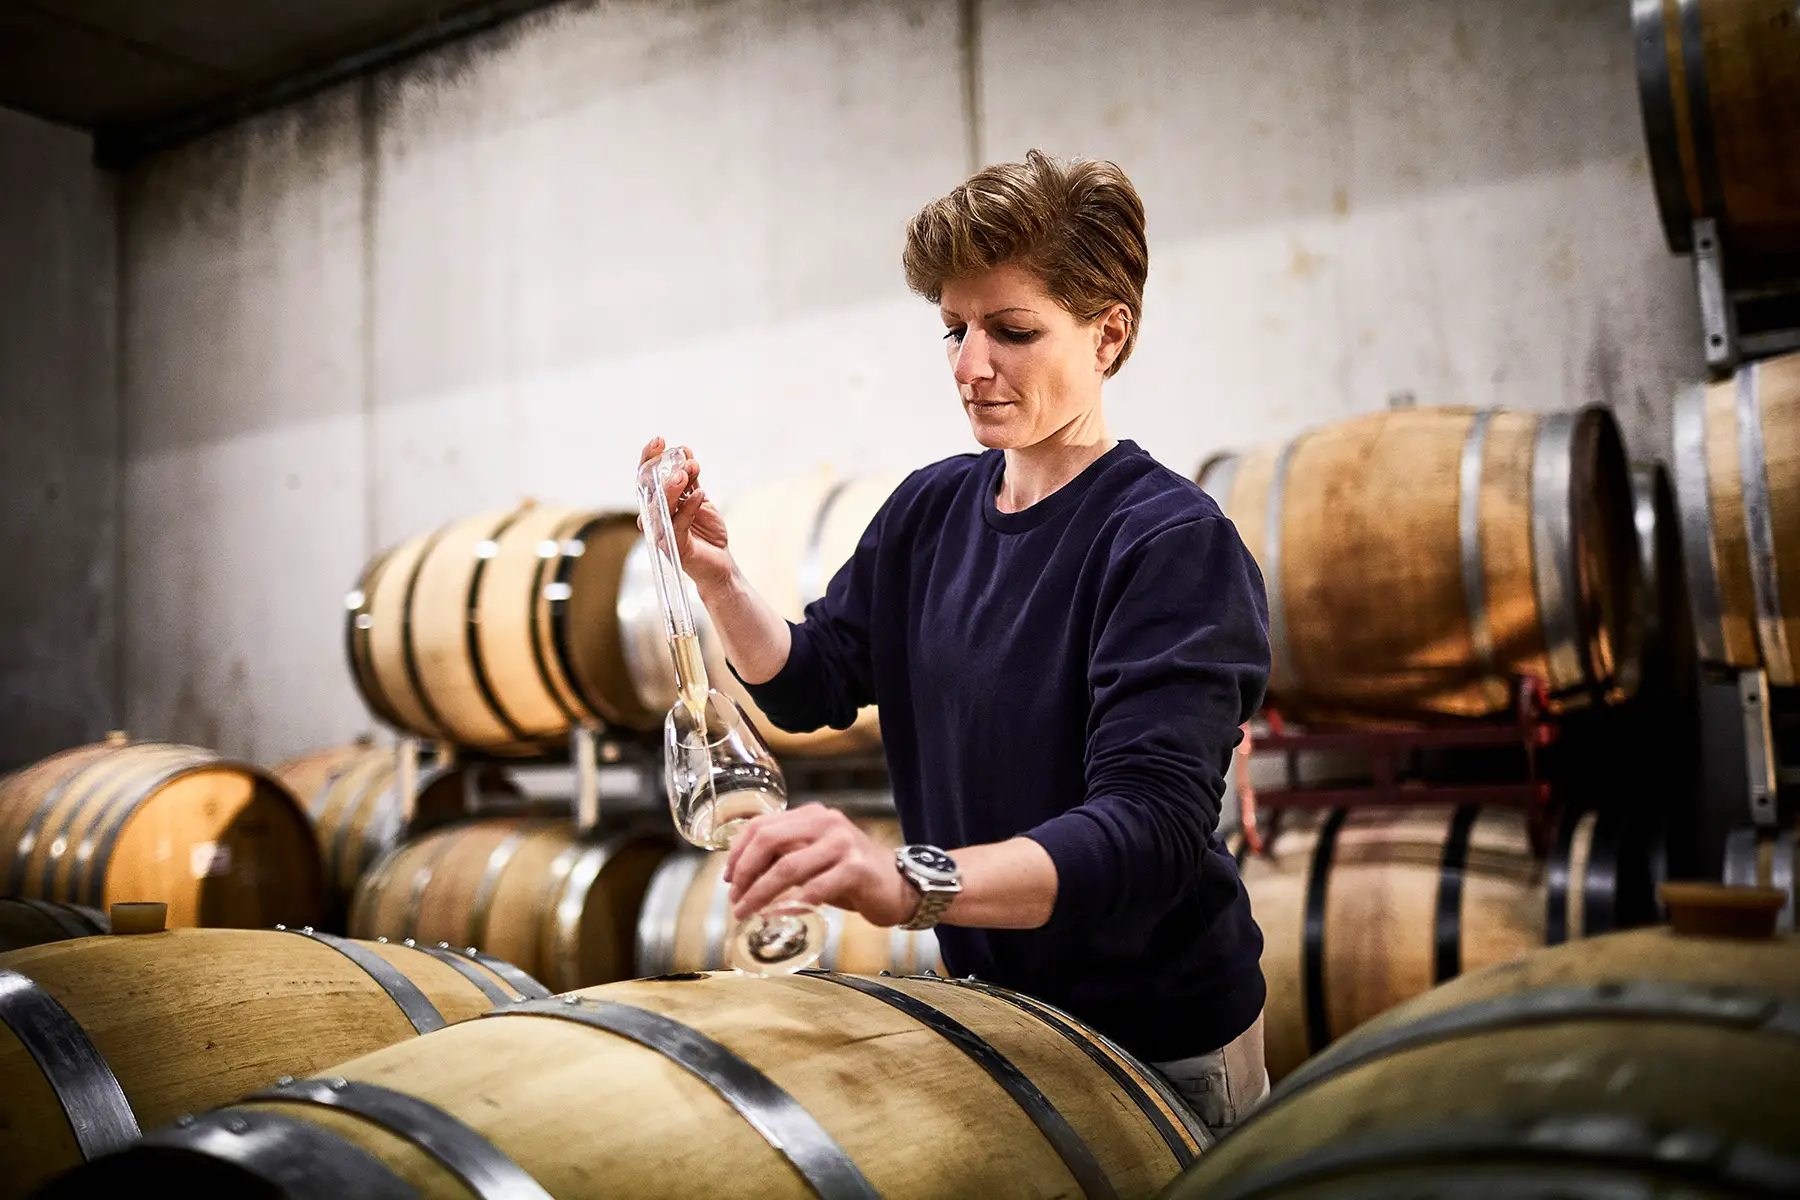 A vintner (woman) testing the wine she made, standing between wooden barrels in a cellar